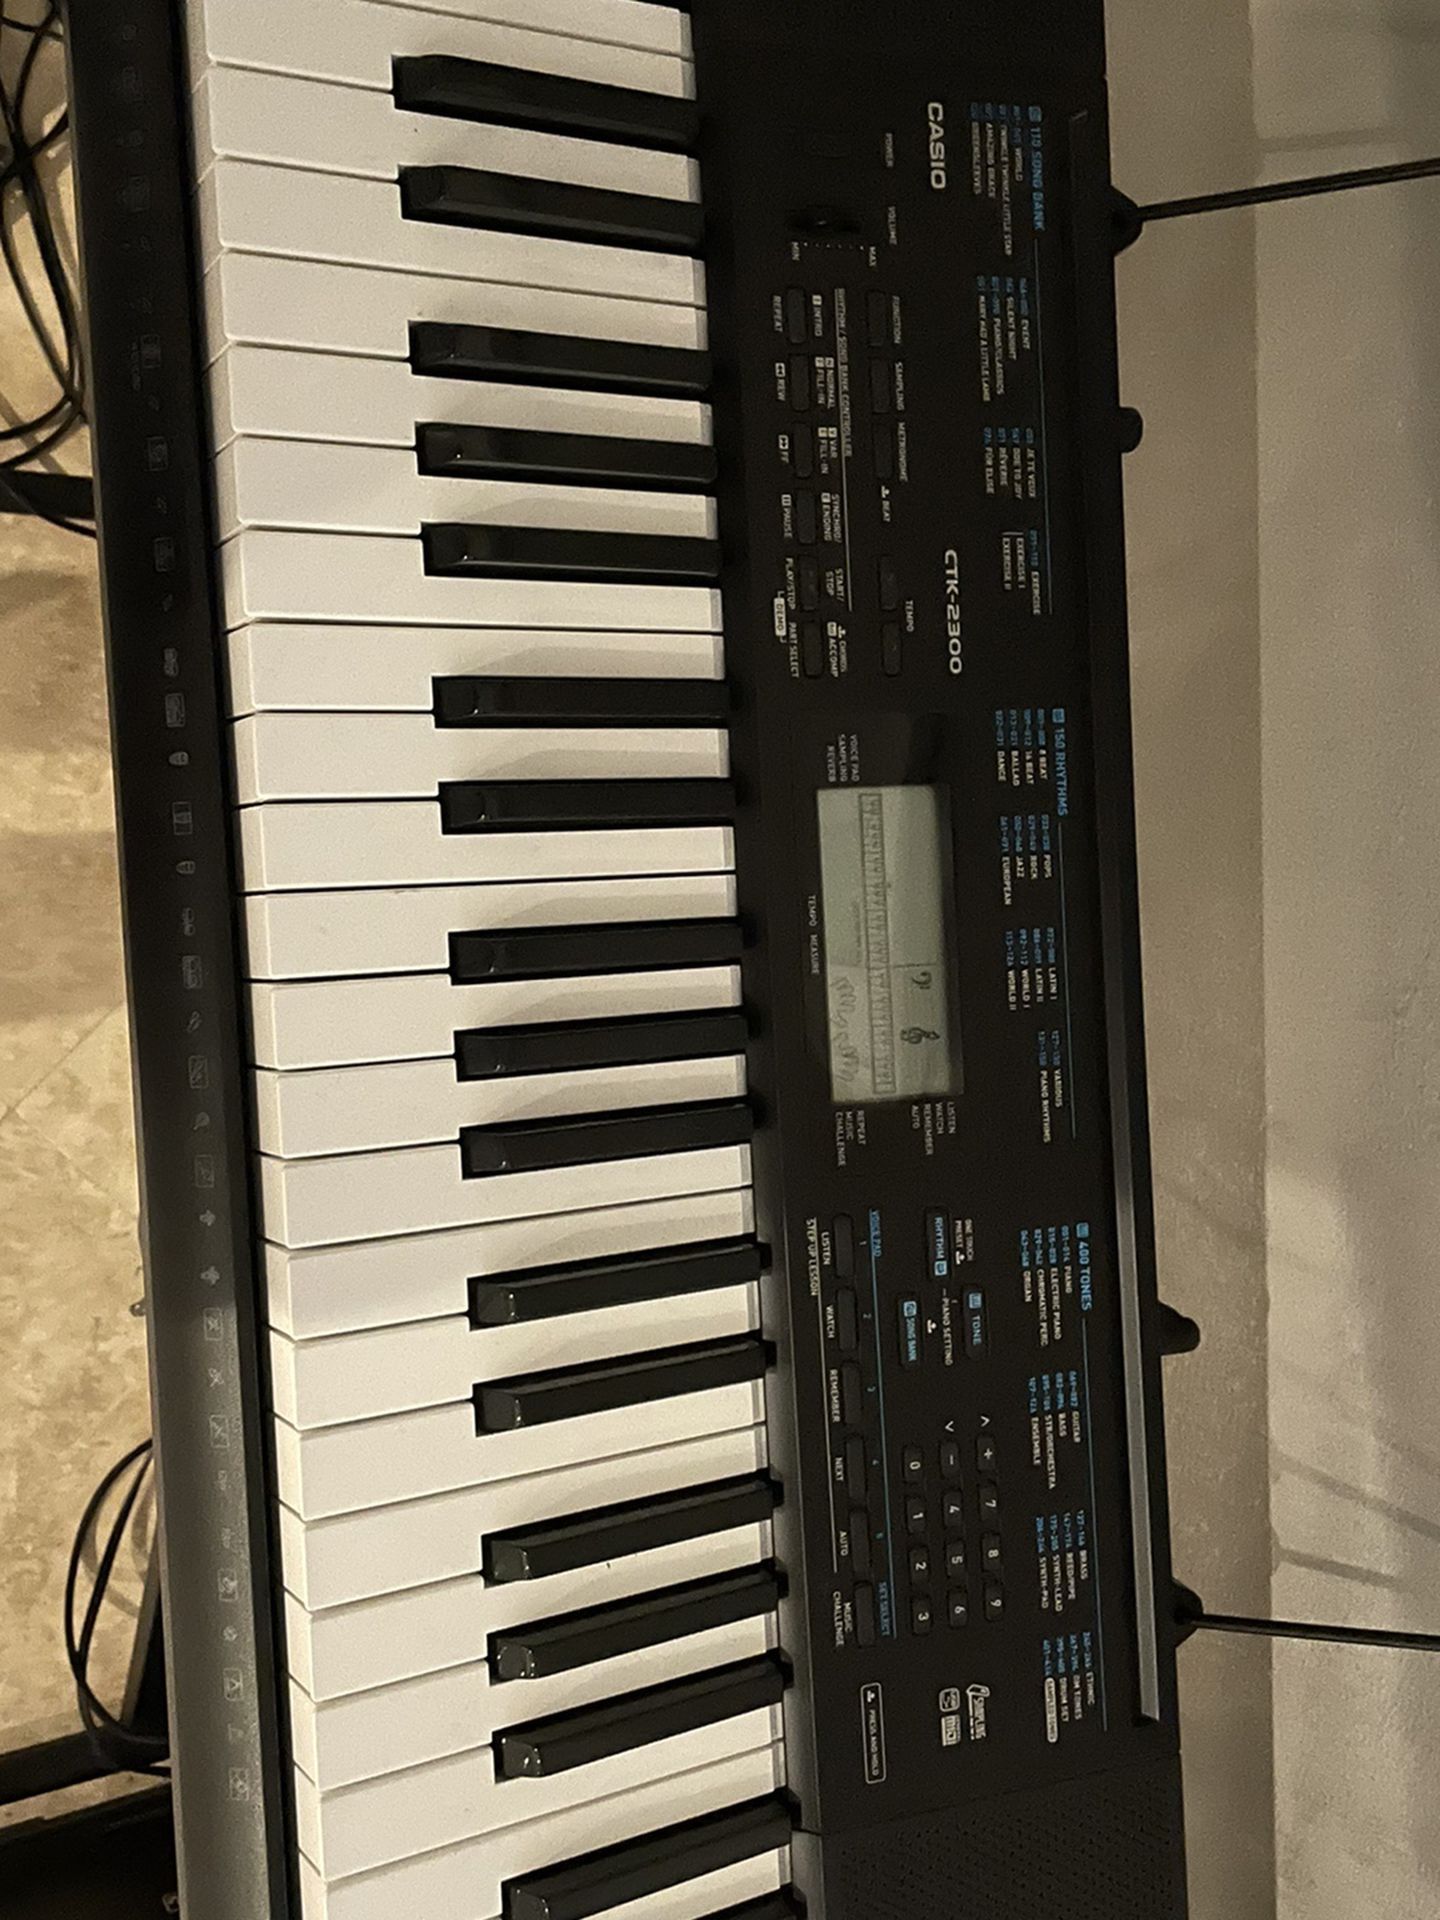 Casio Ctk 2300 with Stand for Sale Fort Lauderdale, FL - OfferUp